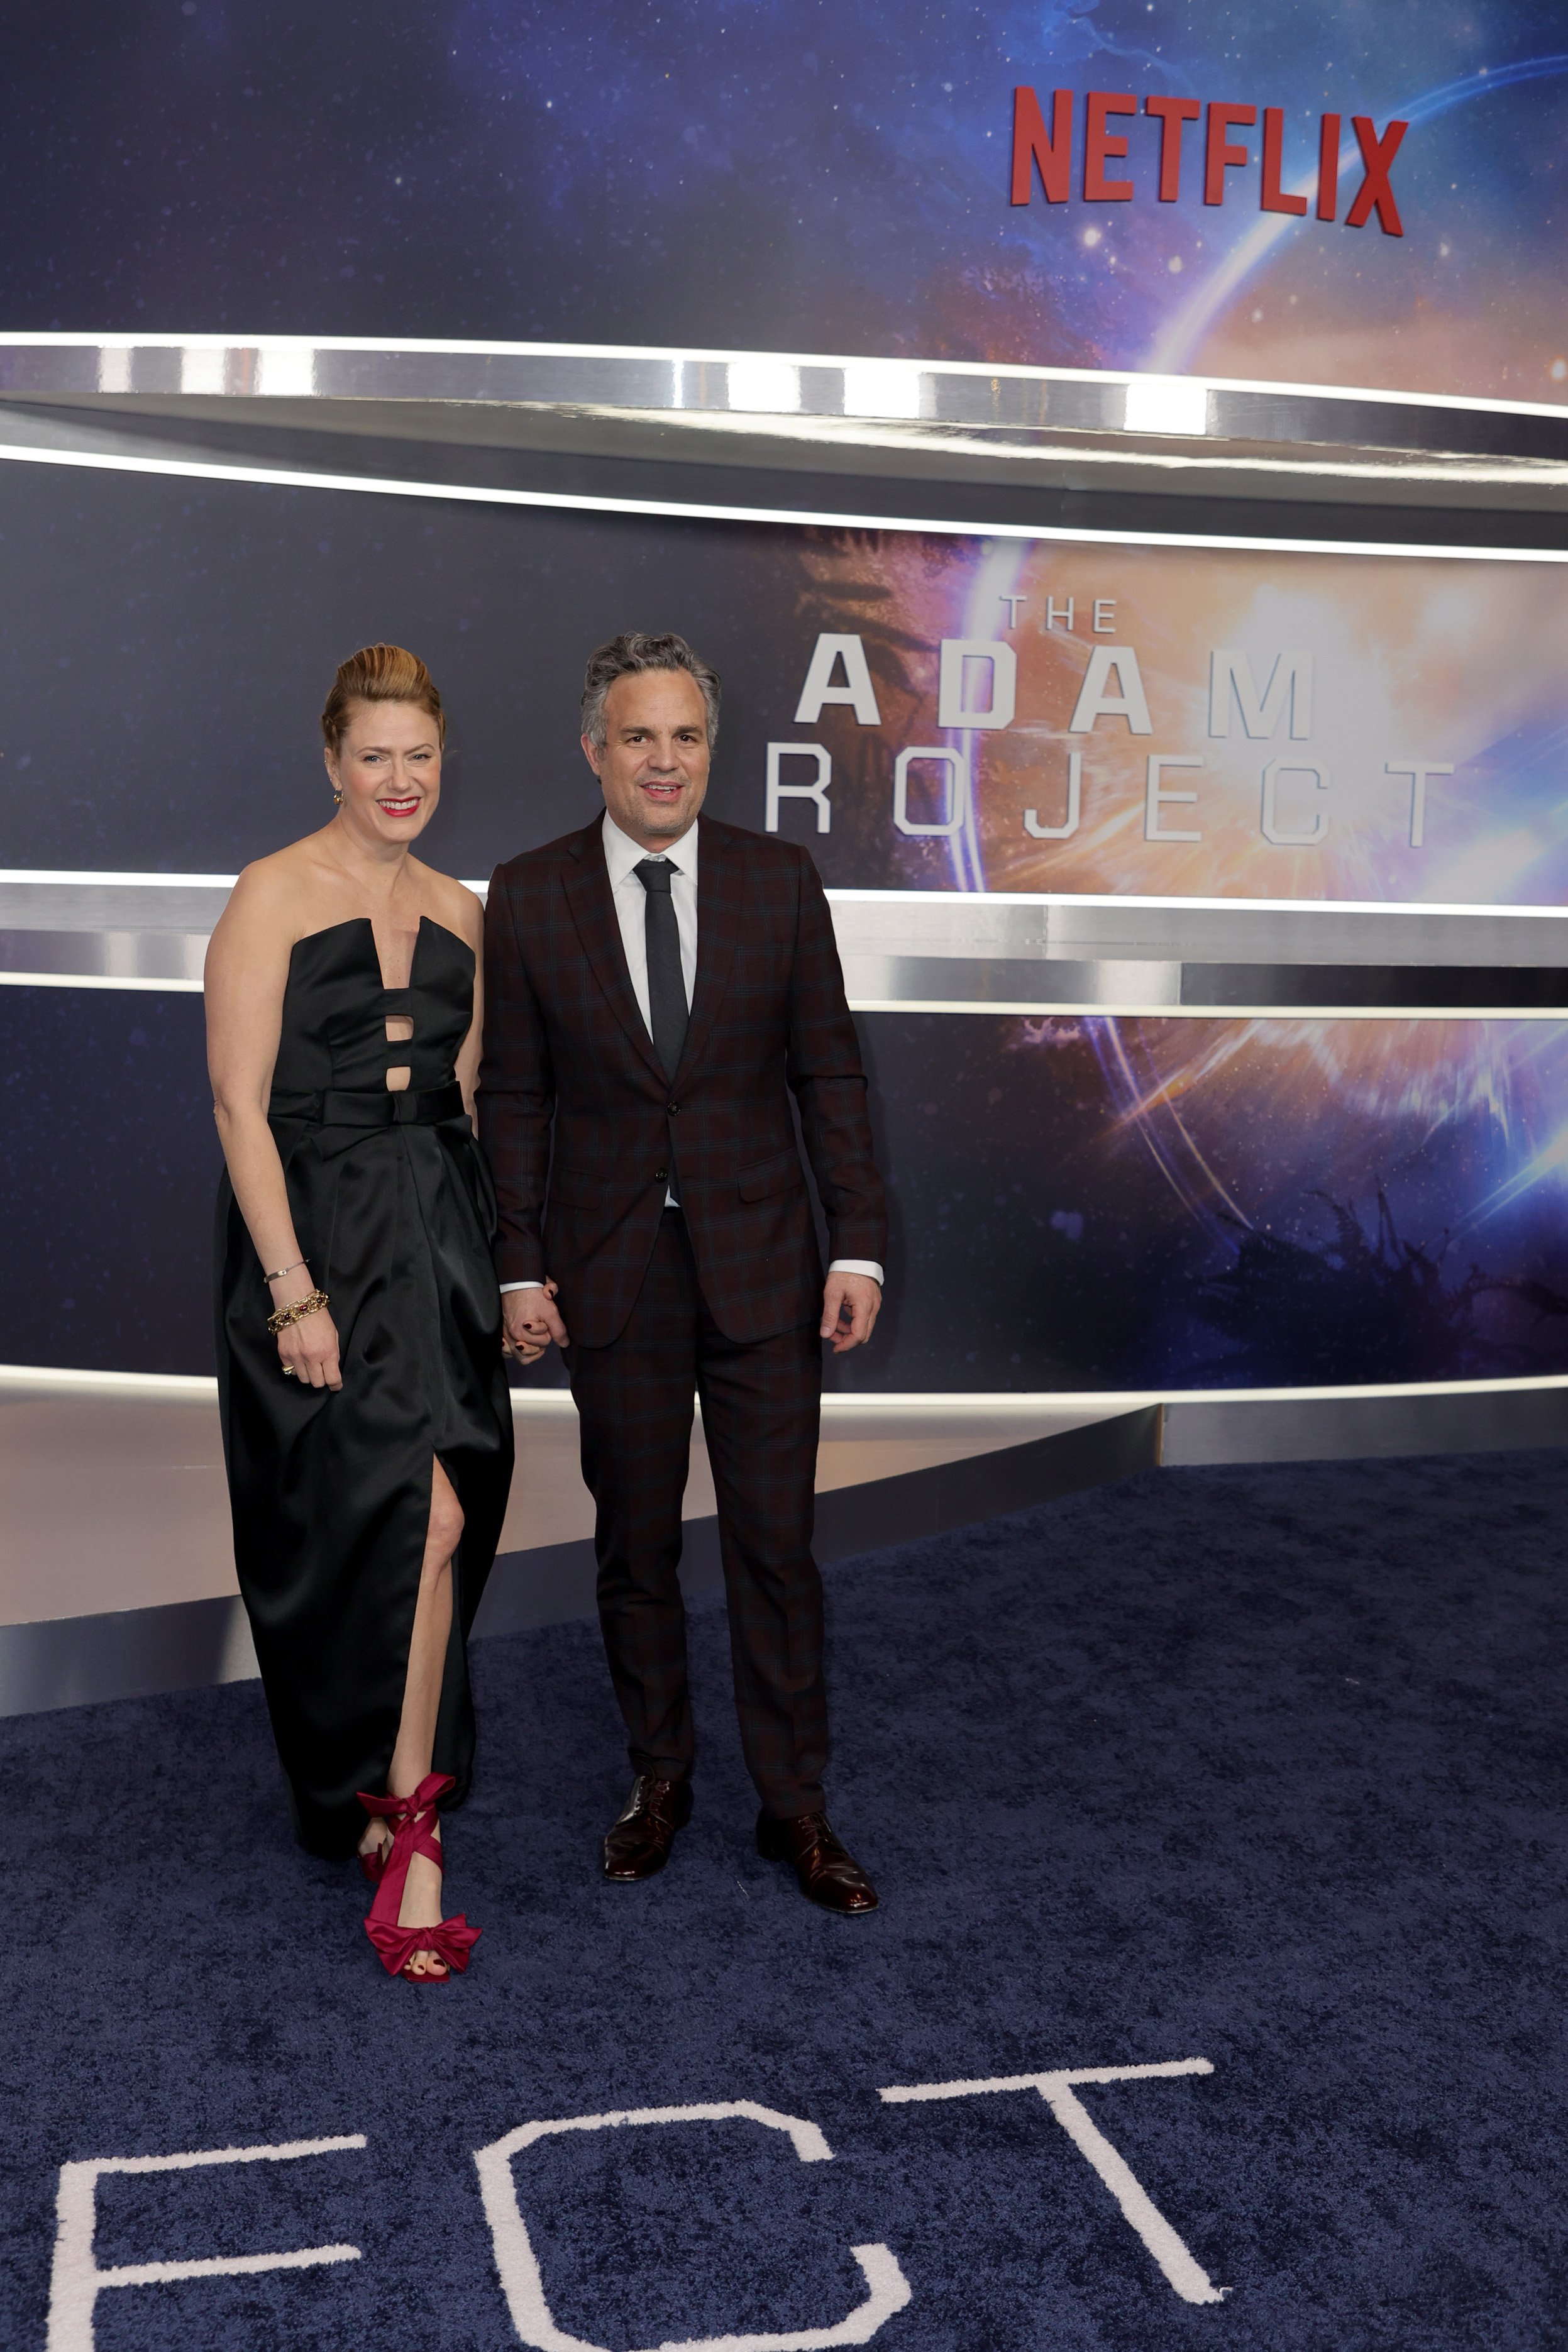 Sunrise Coigney and Mark Ruffalo attend the "The Adam Project" New York Premiere on February 28, 2022 in New York City. | Source: Getty Images